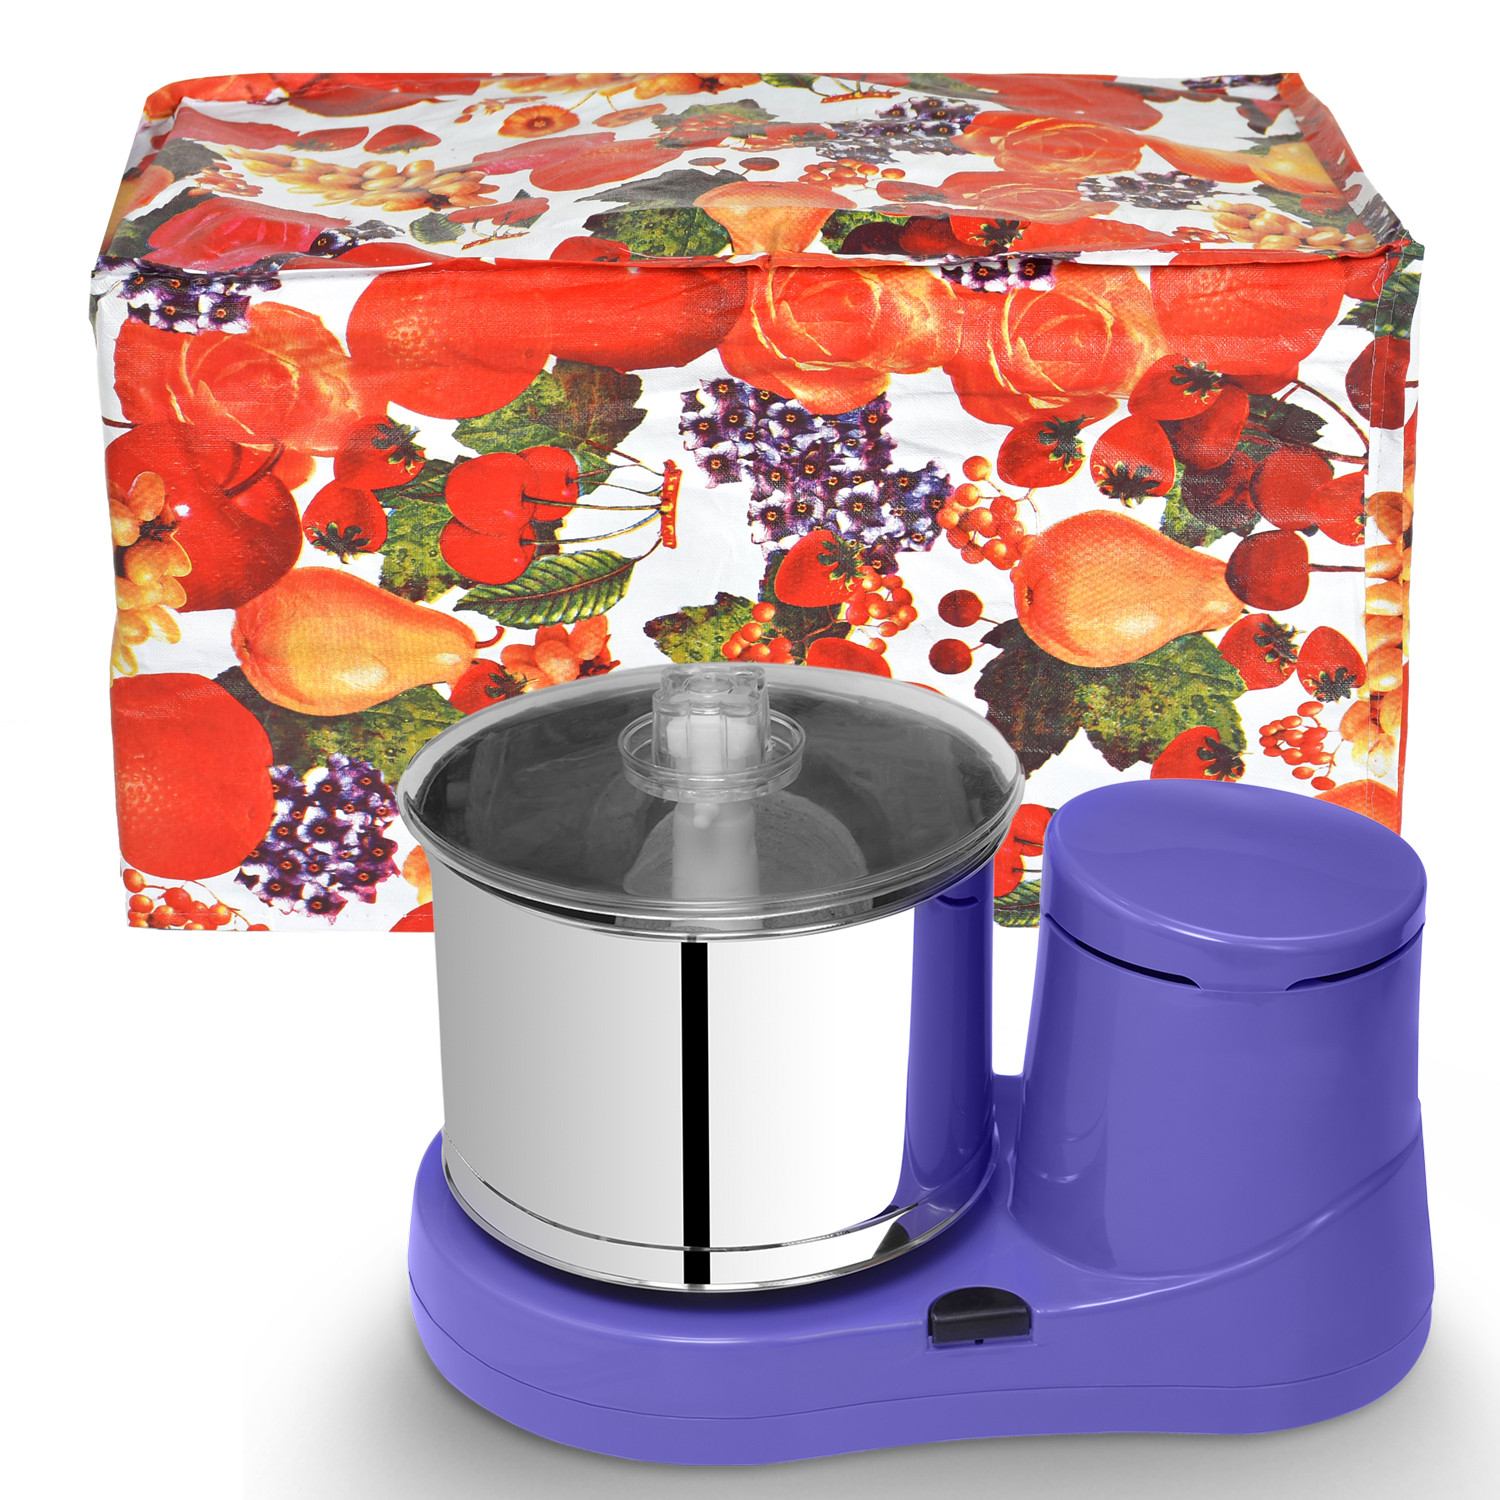 Kuber Industries Fruit Printed Water/Dust Proof PVC Mixer Grinder, Table Top Wet Grinder Cover (Multicolour)-HS43KUBMART25699